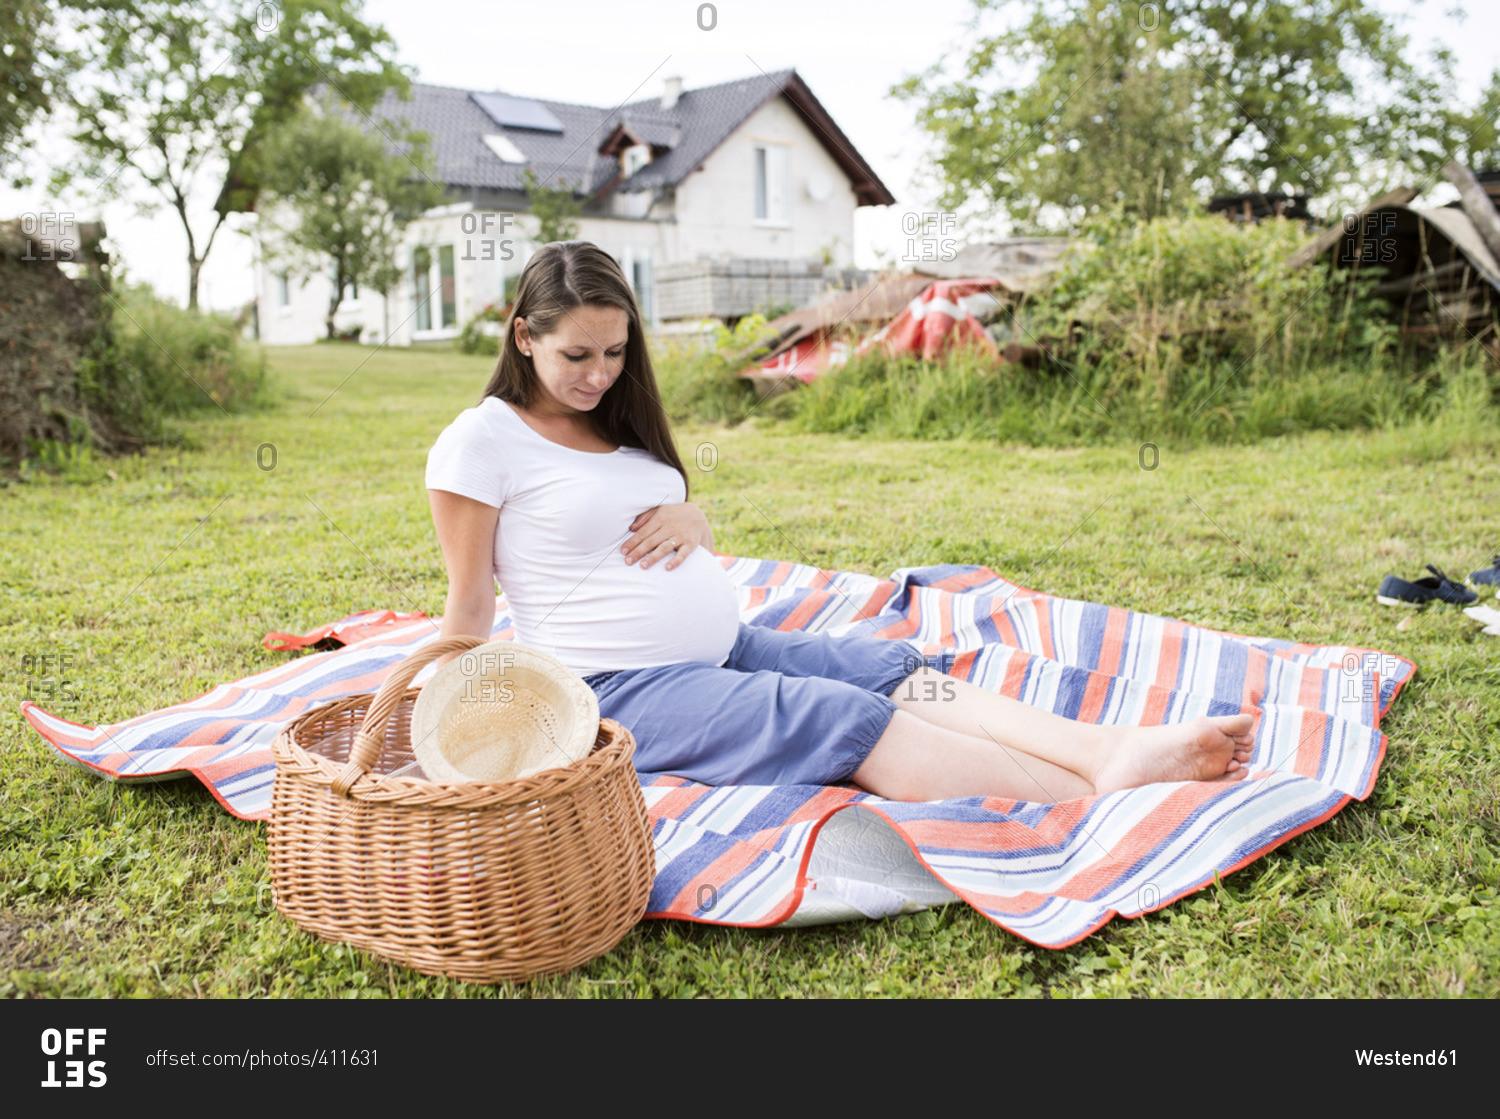 Pregnant woman sitting on picnic blanket touching her belly